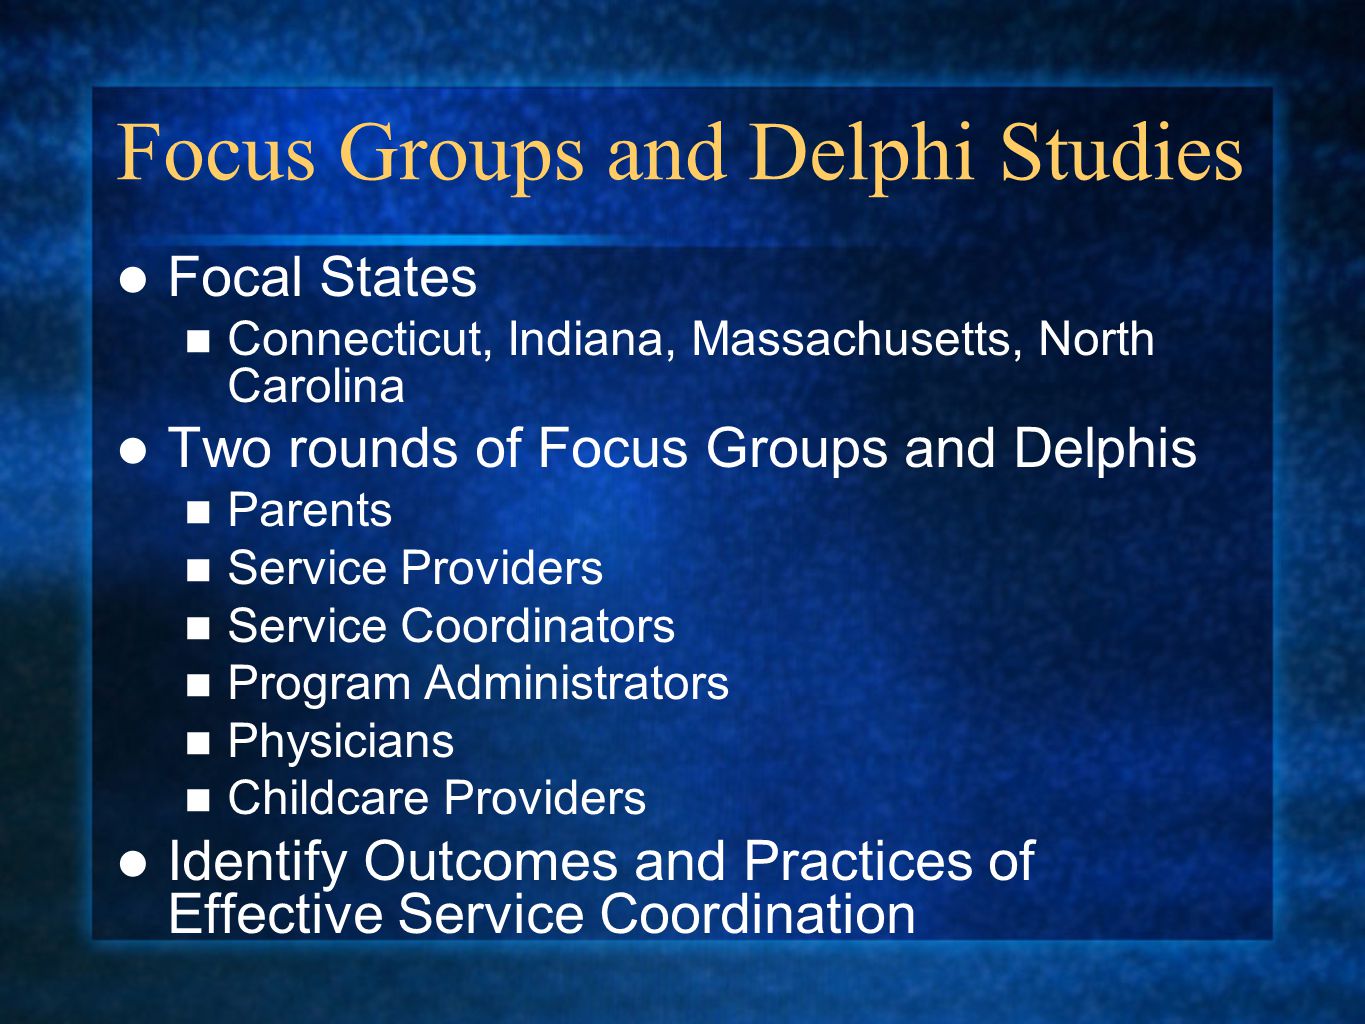 Focus Groups and Delphi Studies Focal States Connecticut, Indiana, Massachusetts, North Carolina Two rounds of Focus Groups and Delphis Parents Service Providers Service Coordinators Program Administrators Physicians Childcare Providers Identify Outcomes and Practices of Effective Service Coordination